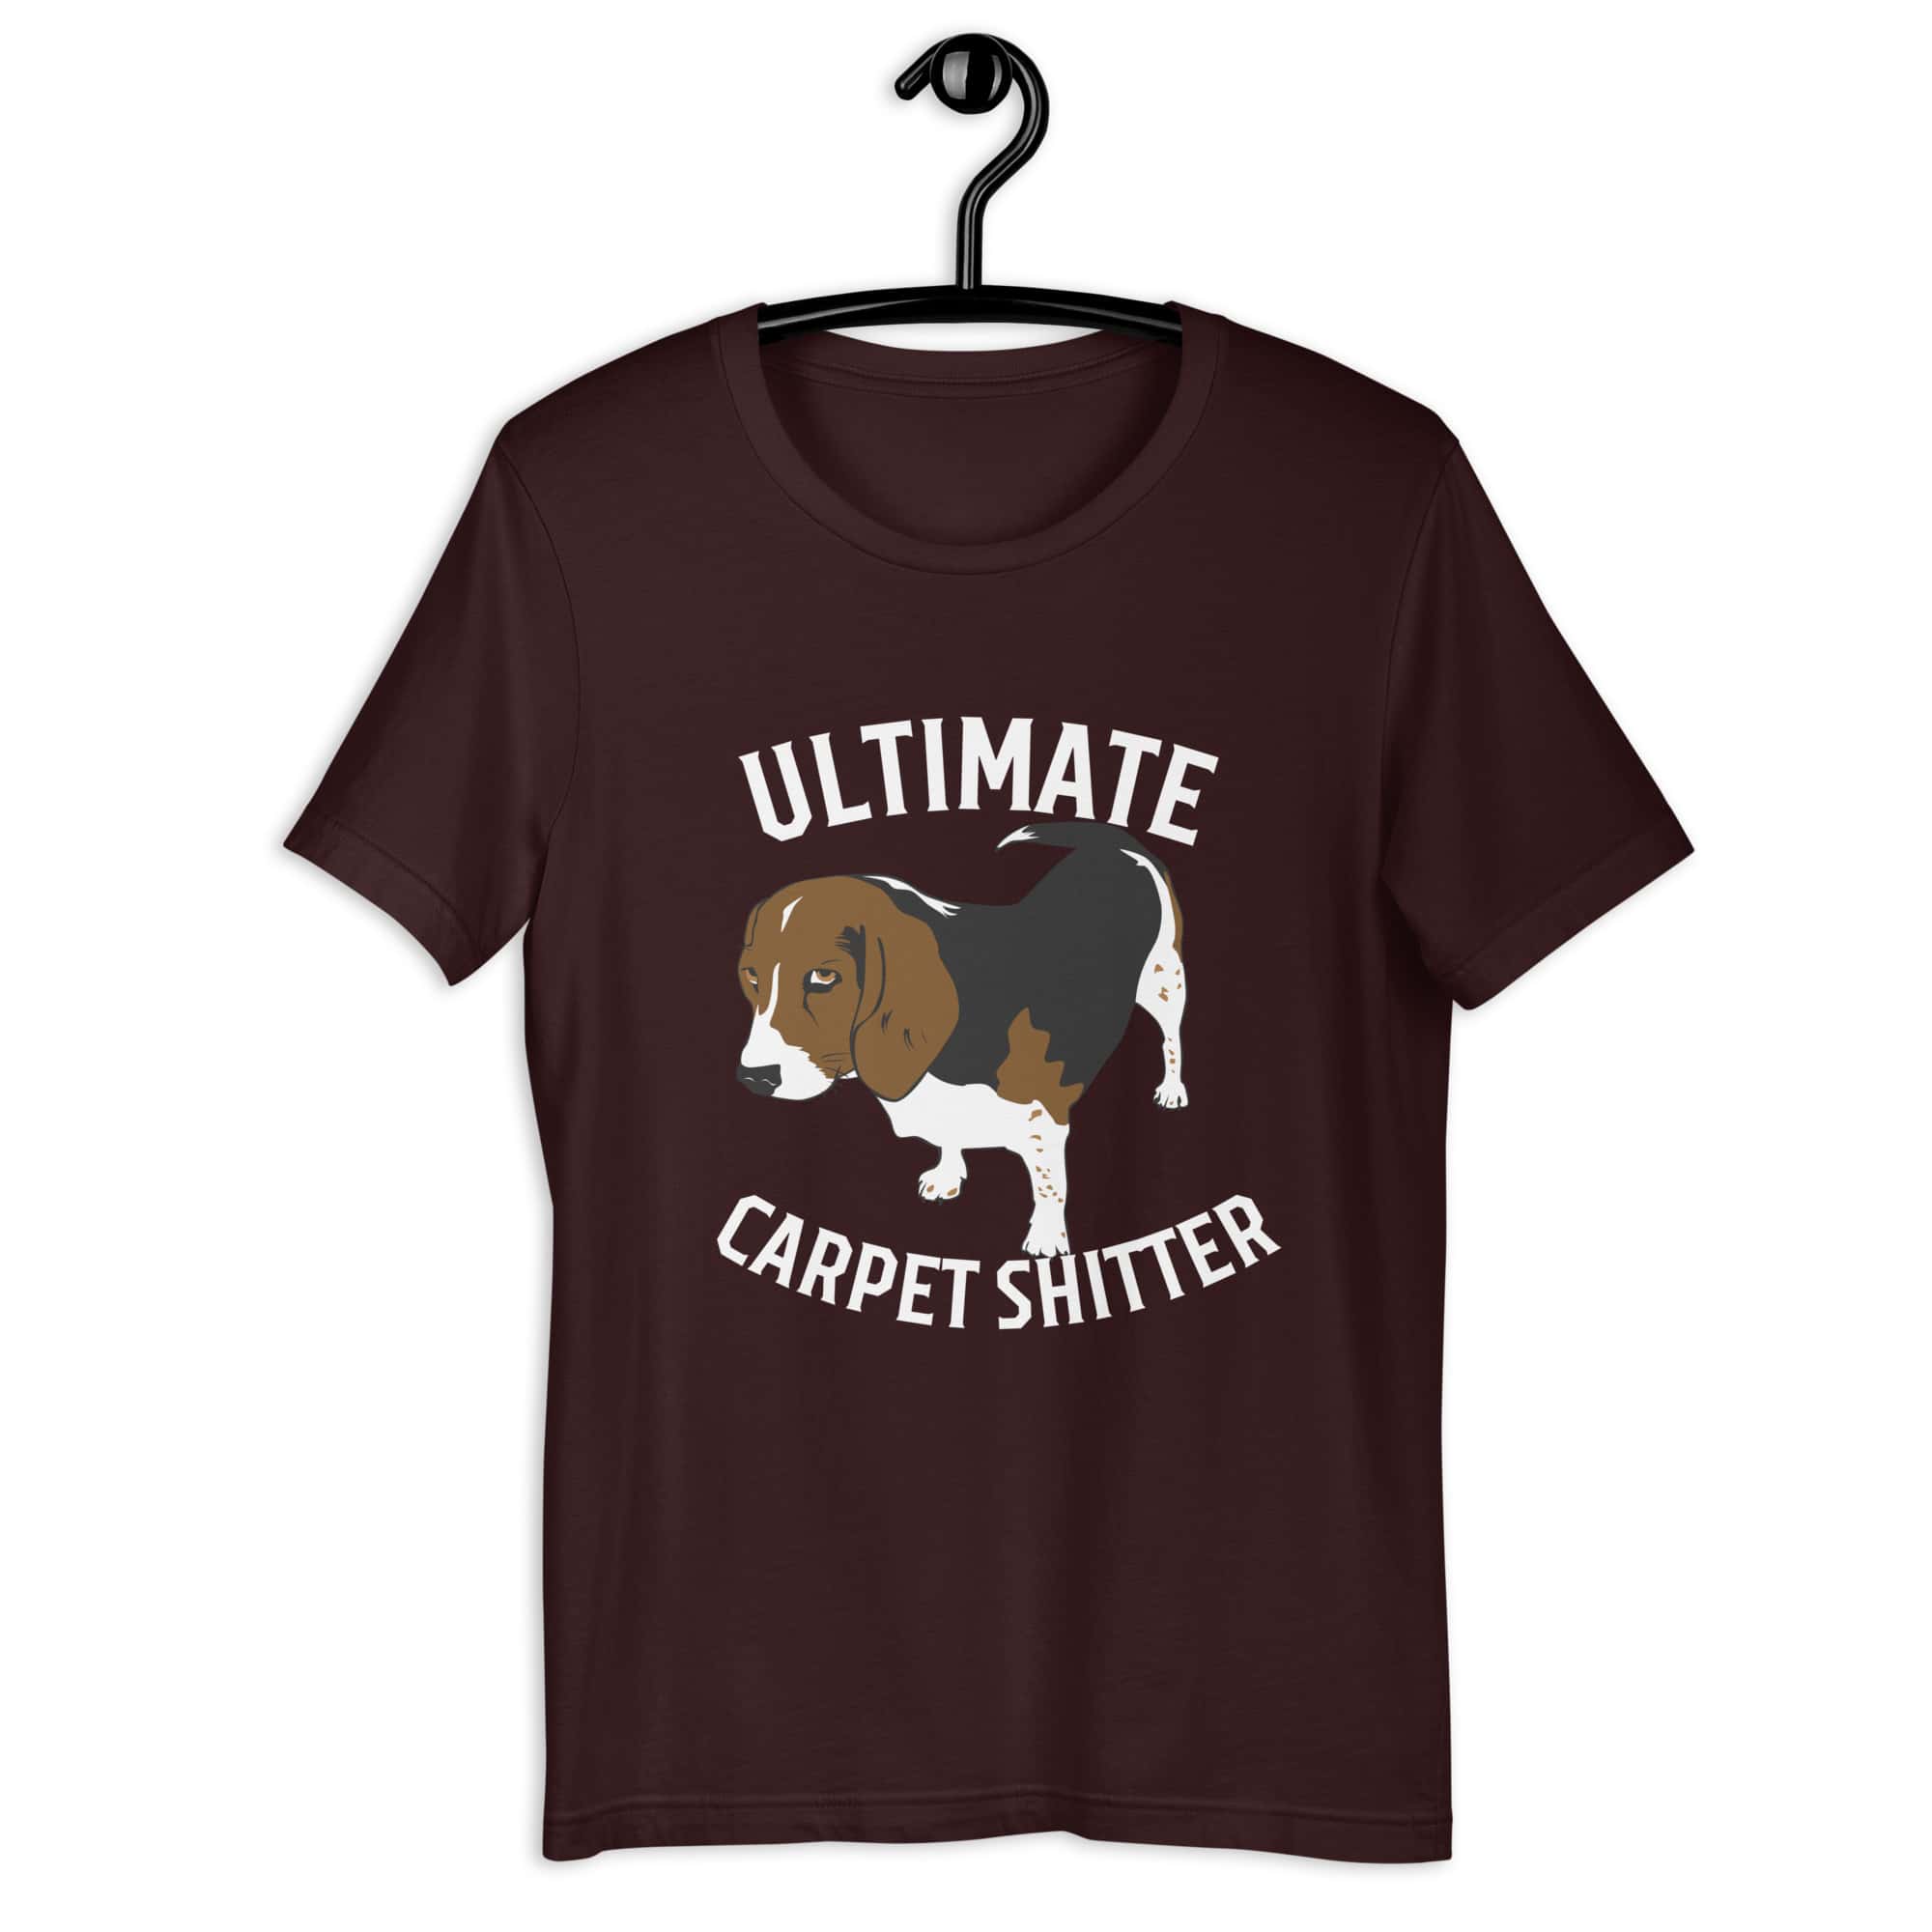 The Ultimate Carpet Shitter Funny Hound Unisex T-Shirt brown